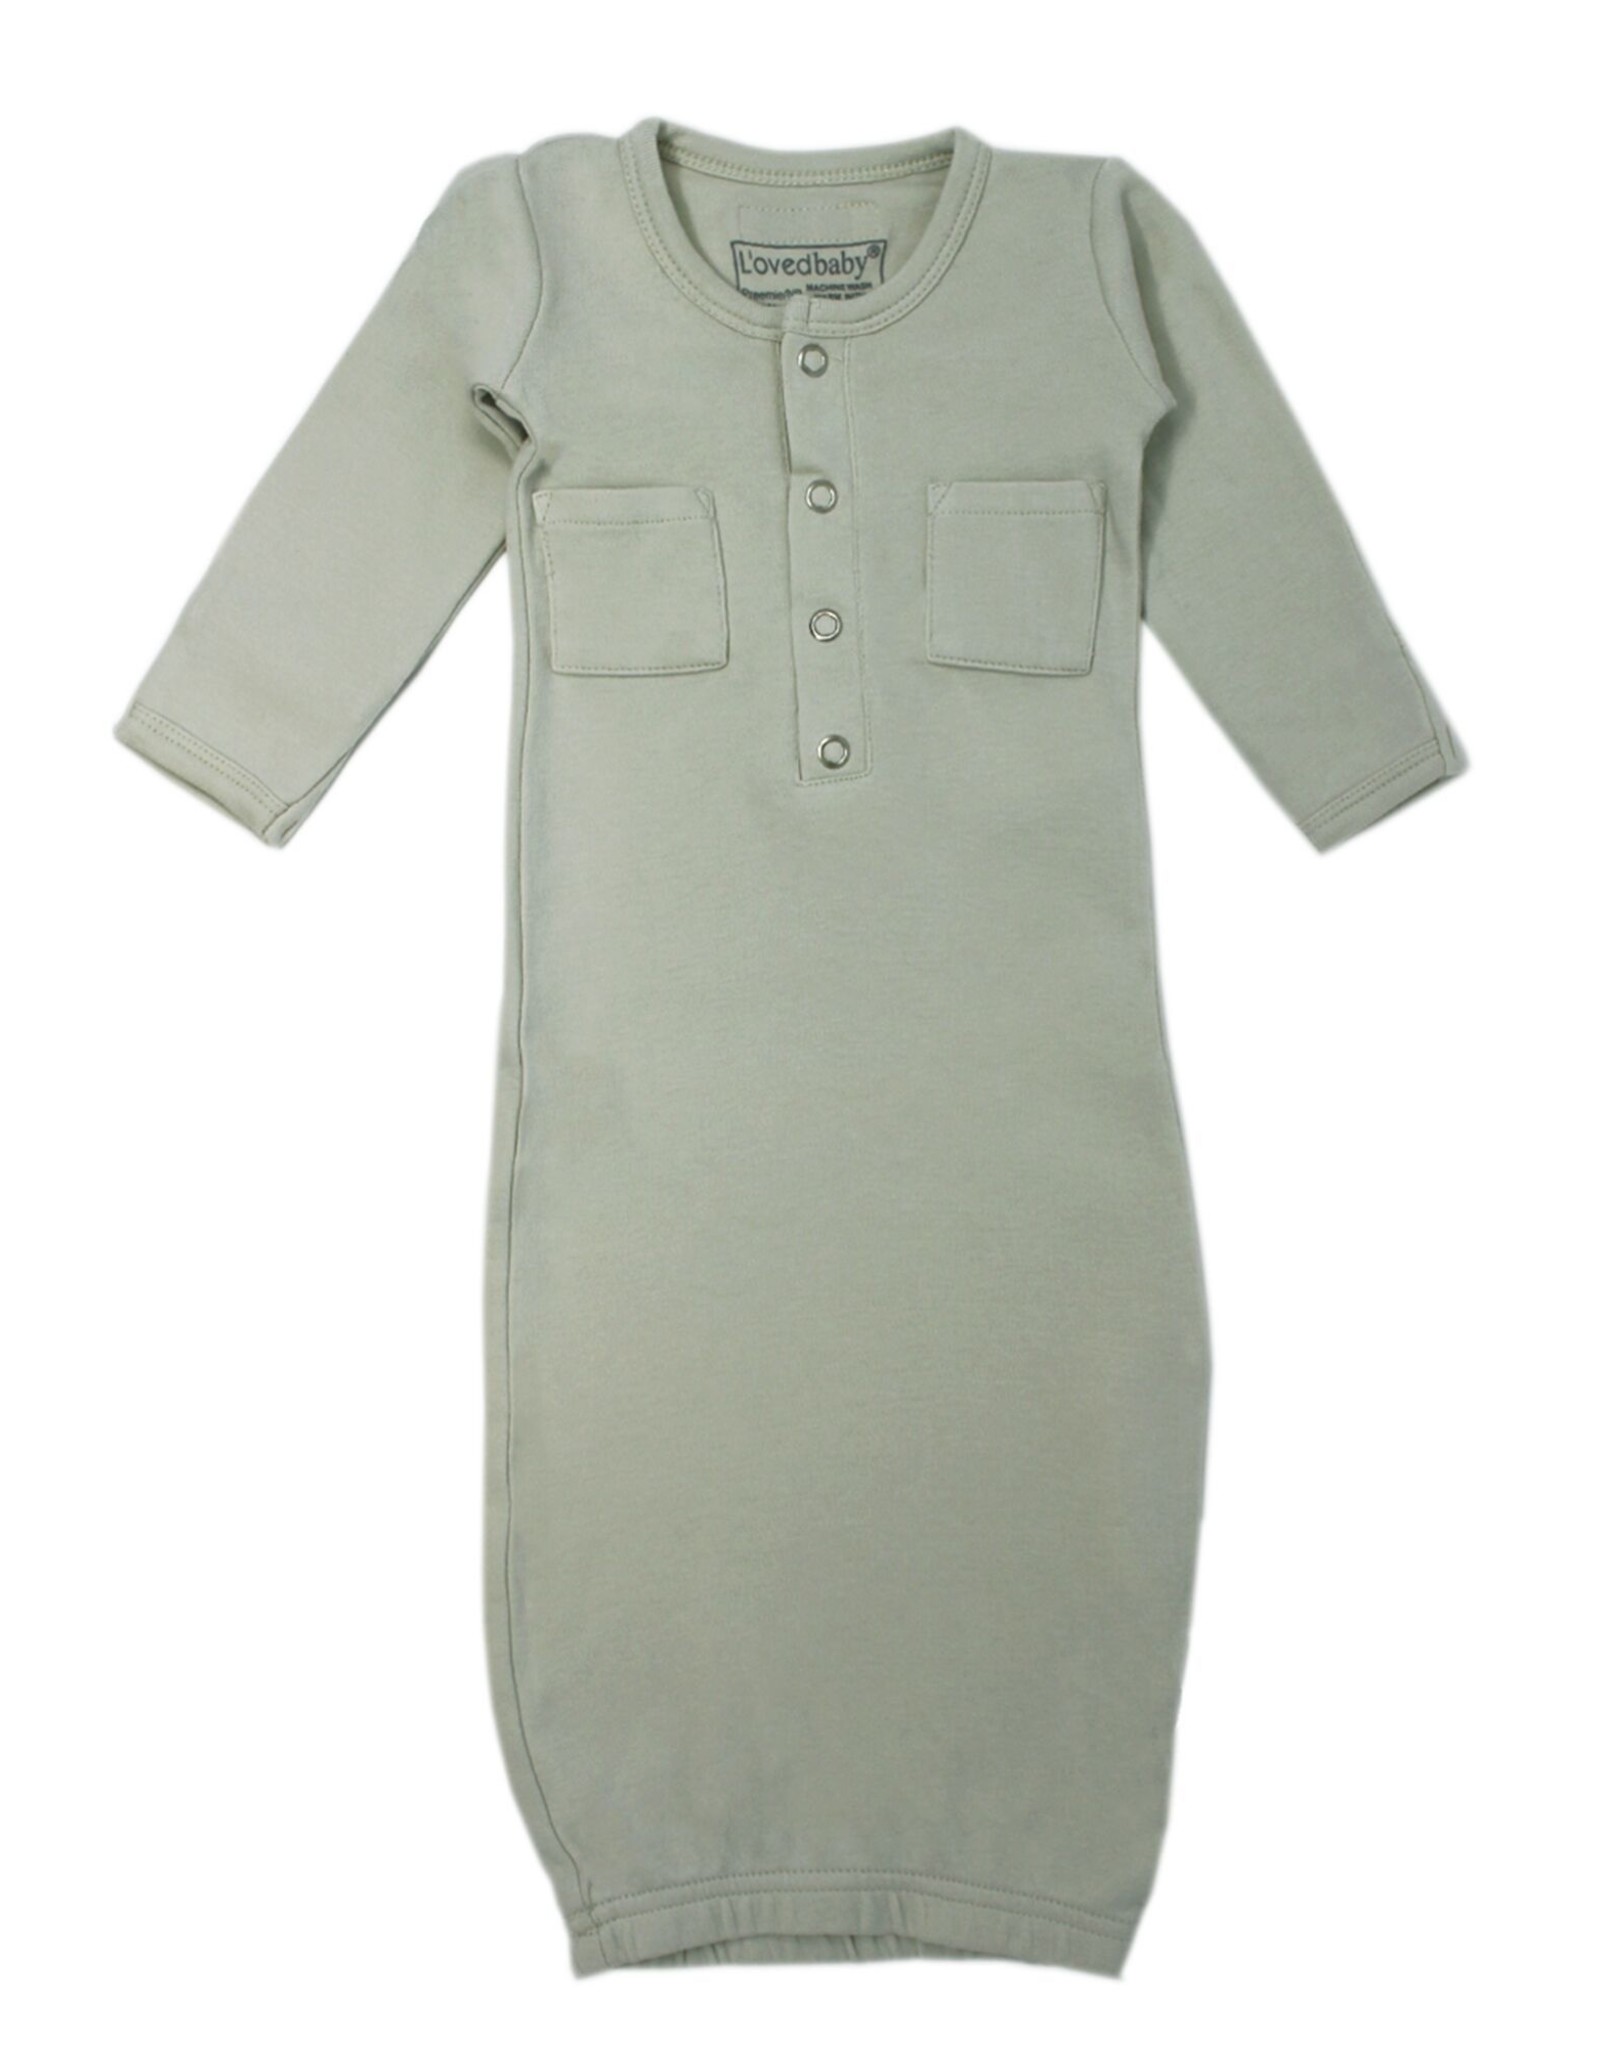 L'oved Baby Organic Cotton Baby Gown- Seafoam